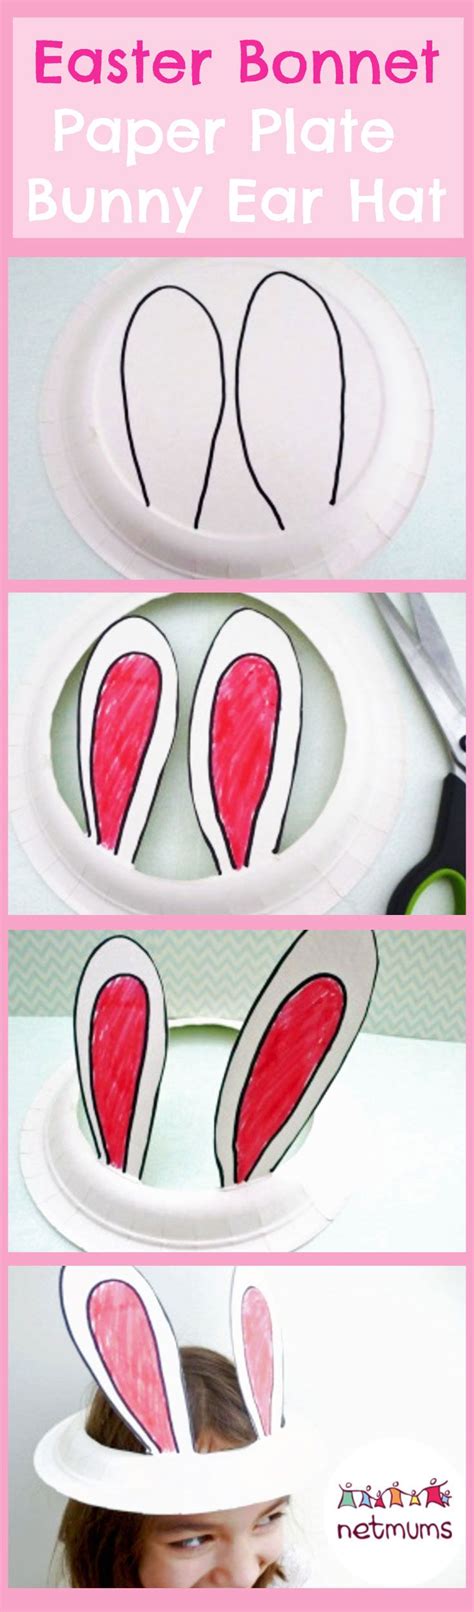 How To Make A Paper Plate Bunny Ear Easter Bonnet Easter